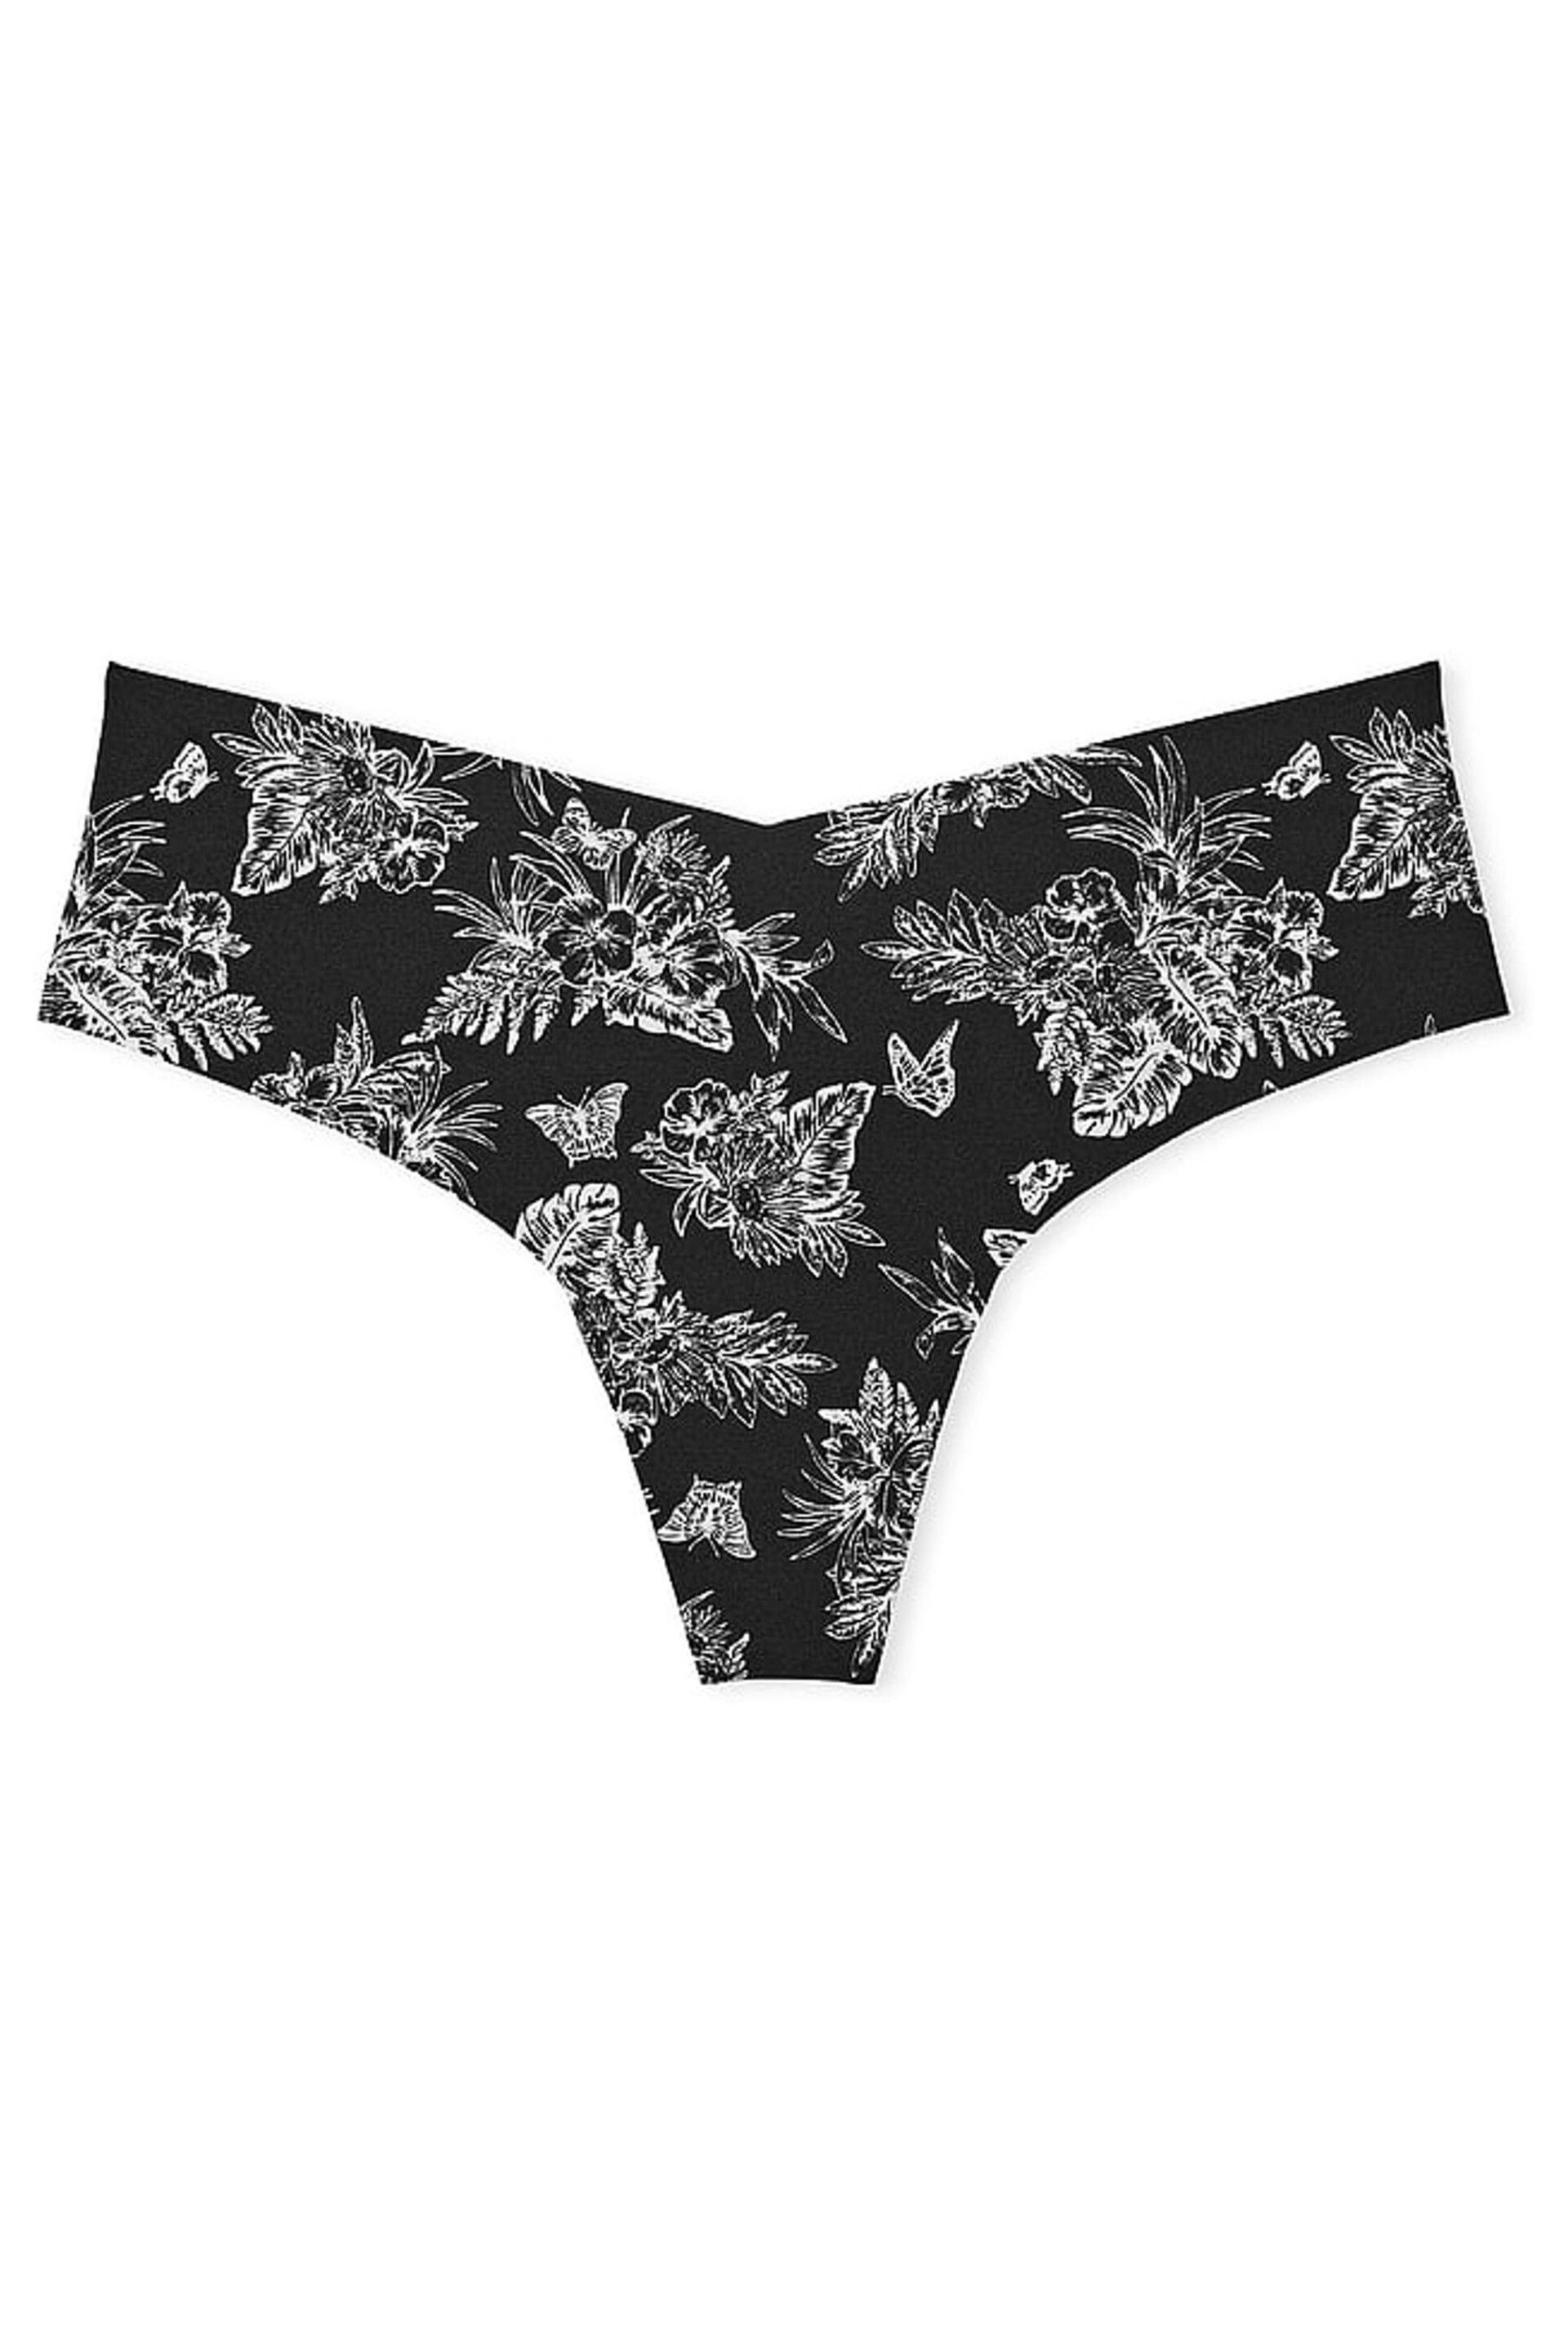 Victoria's Secret Black Tropical Toile Thong Knickers - Image 3 of 3